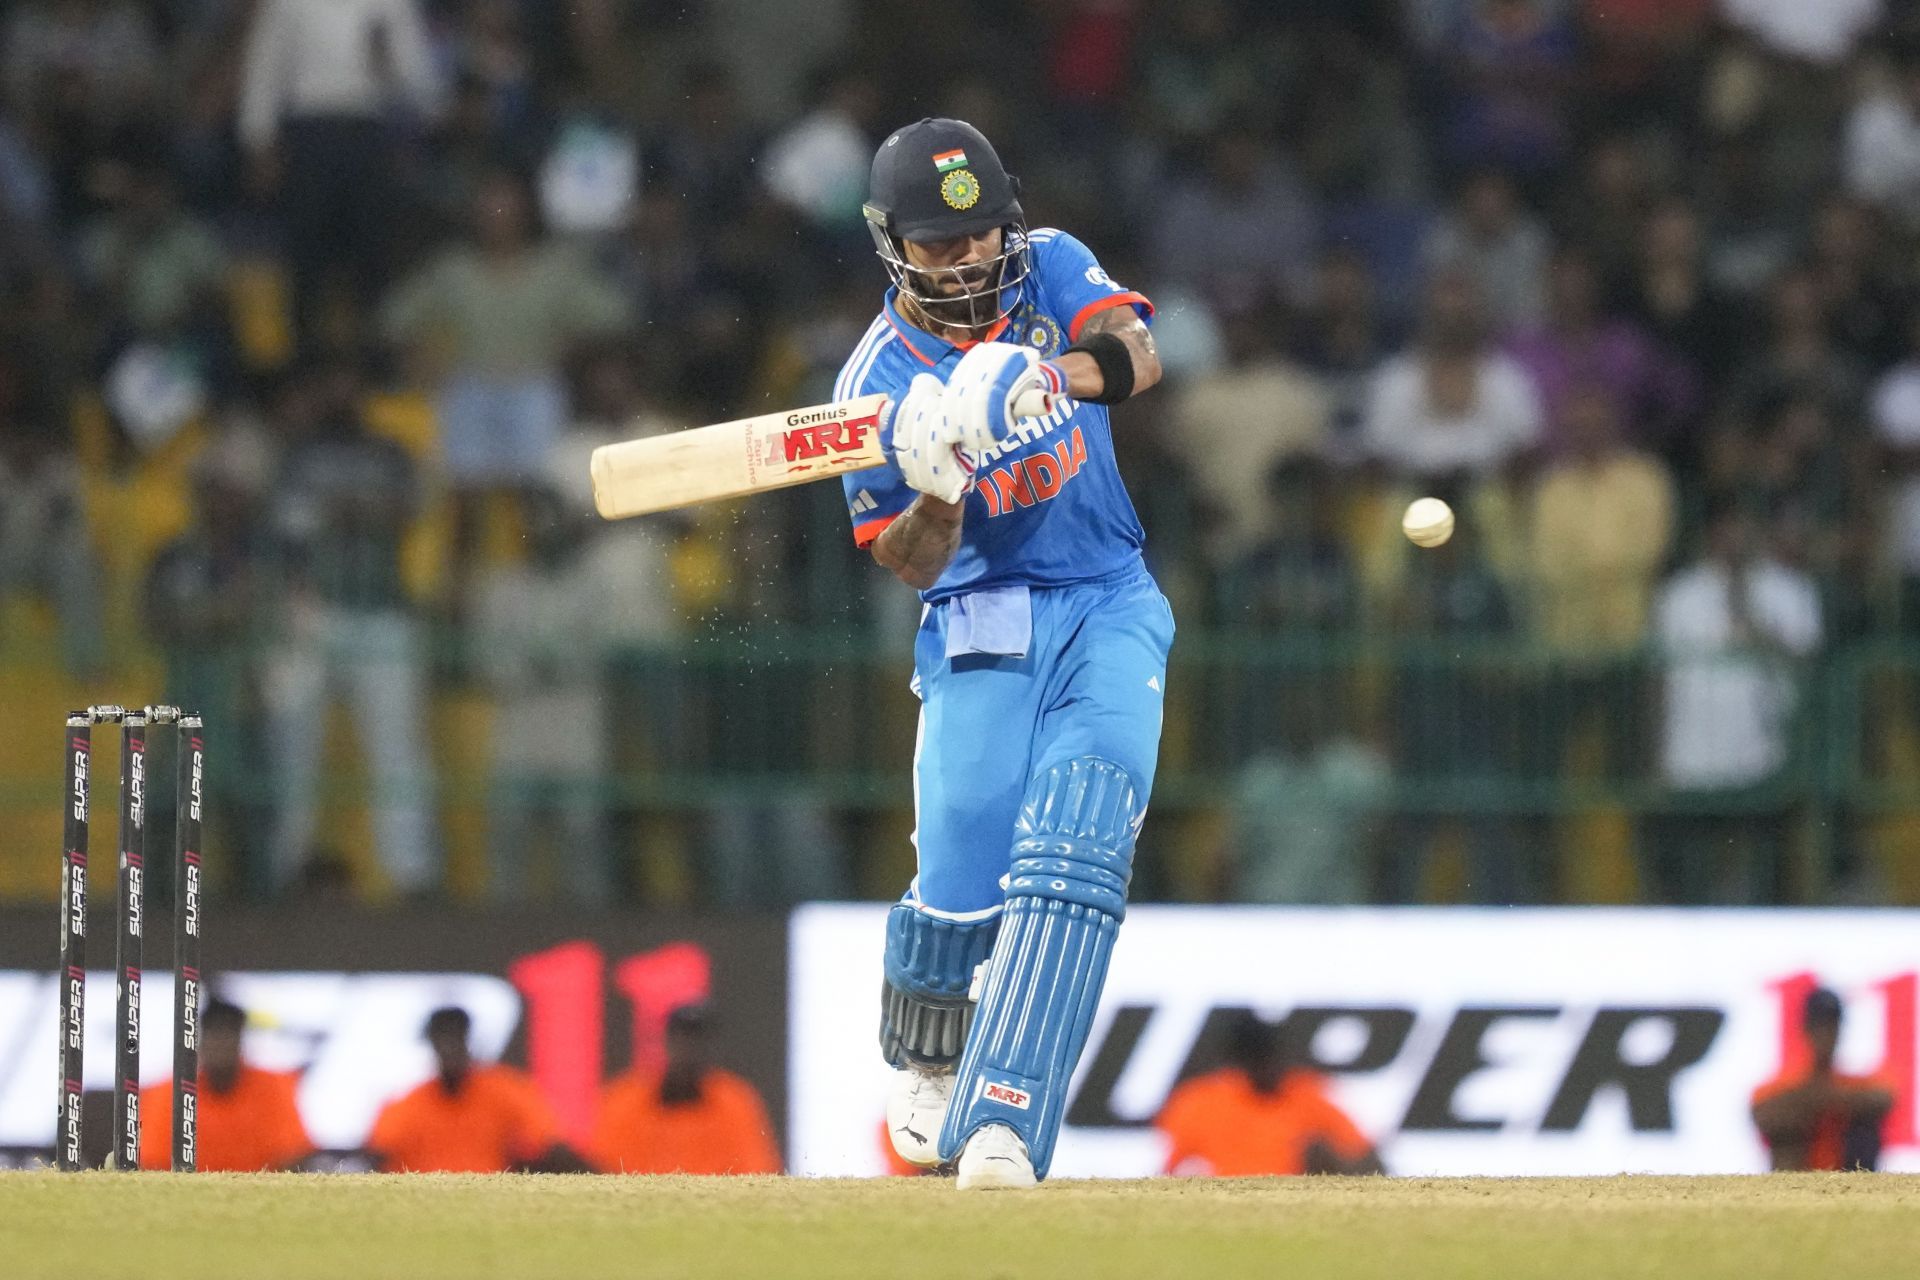 During his wonderful knock, Virat Kohli also became the fastest batter to reach the 13000-run landmark in one-day cricket. The 34-year-old needed 267 innings to reach the mark. With this, he broke Sachin Tendulkar&rsquo;s record, who got to 13000 runs in 321 ODI innings. (Pic: AP Photo/Eranga Jayawardena)